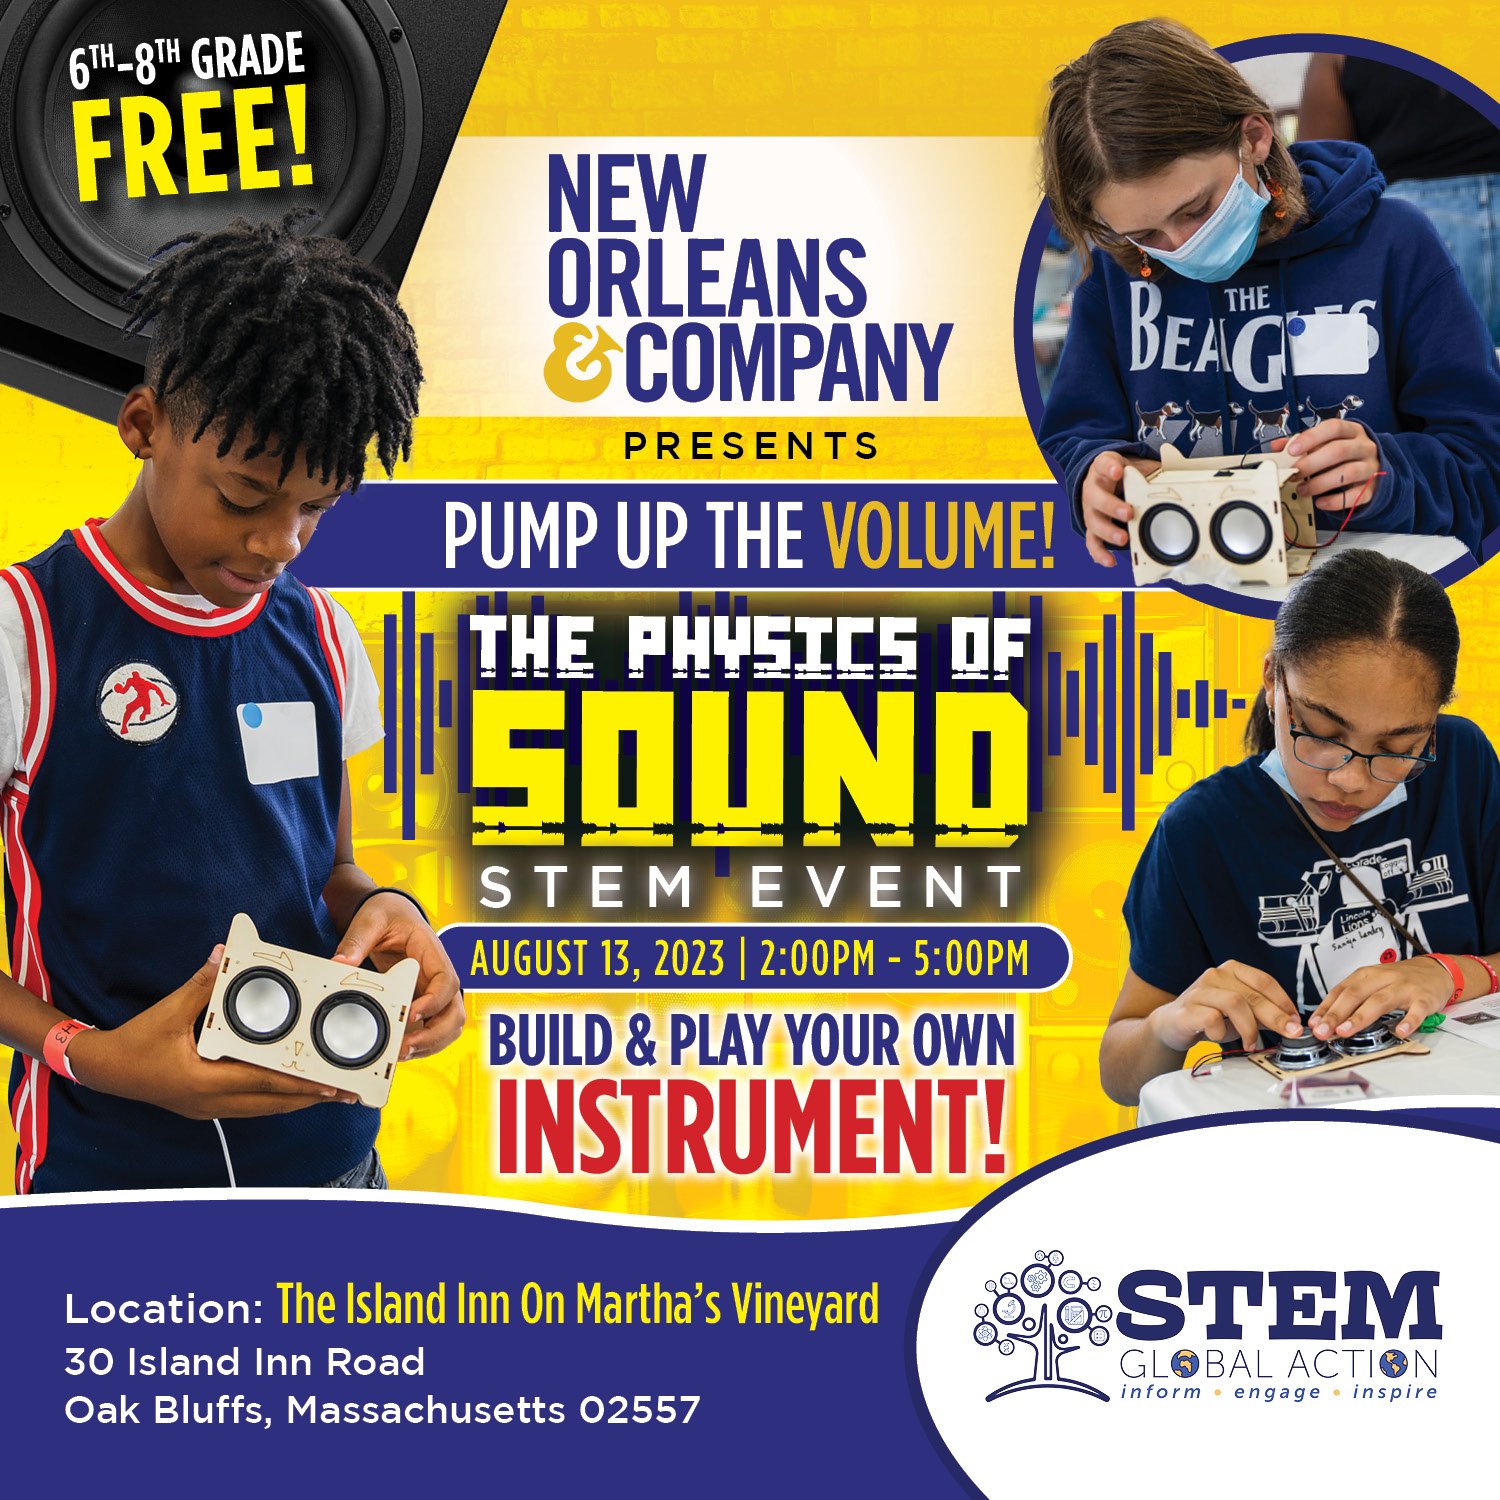 New Orleans & Co. - Physics of Sound Flyer.jpg